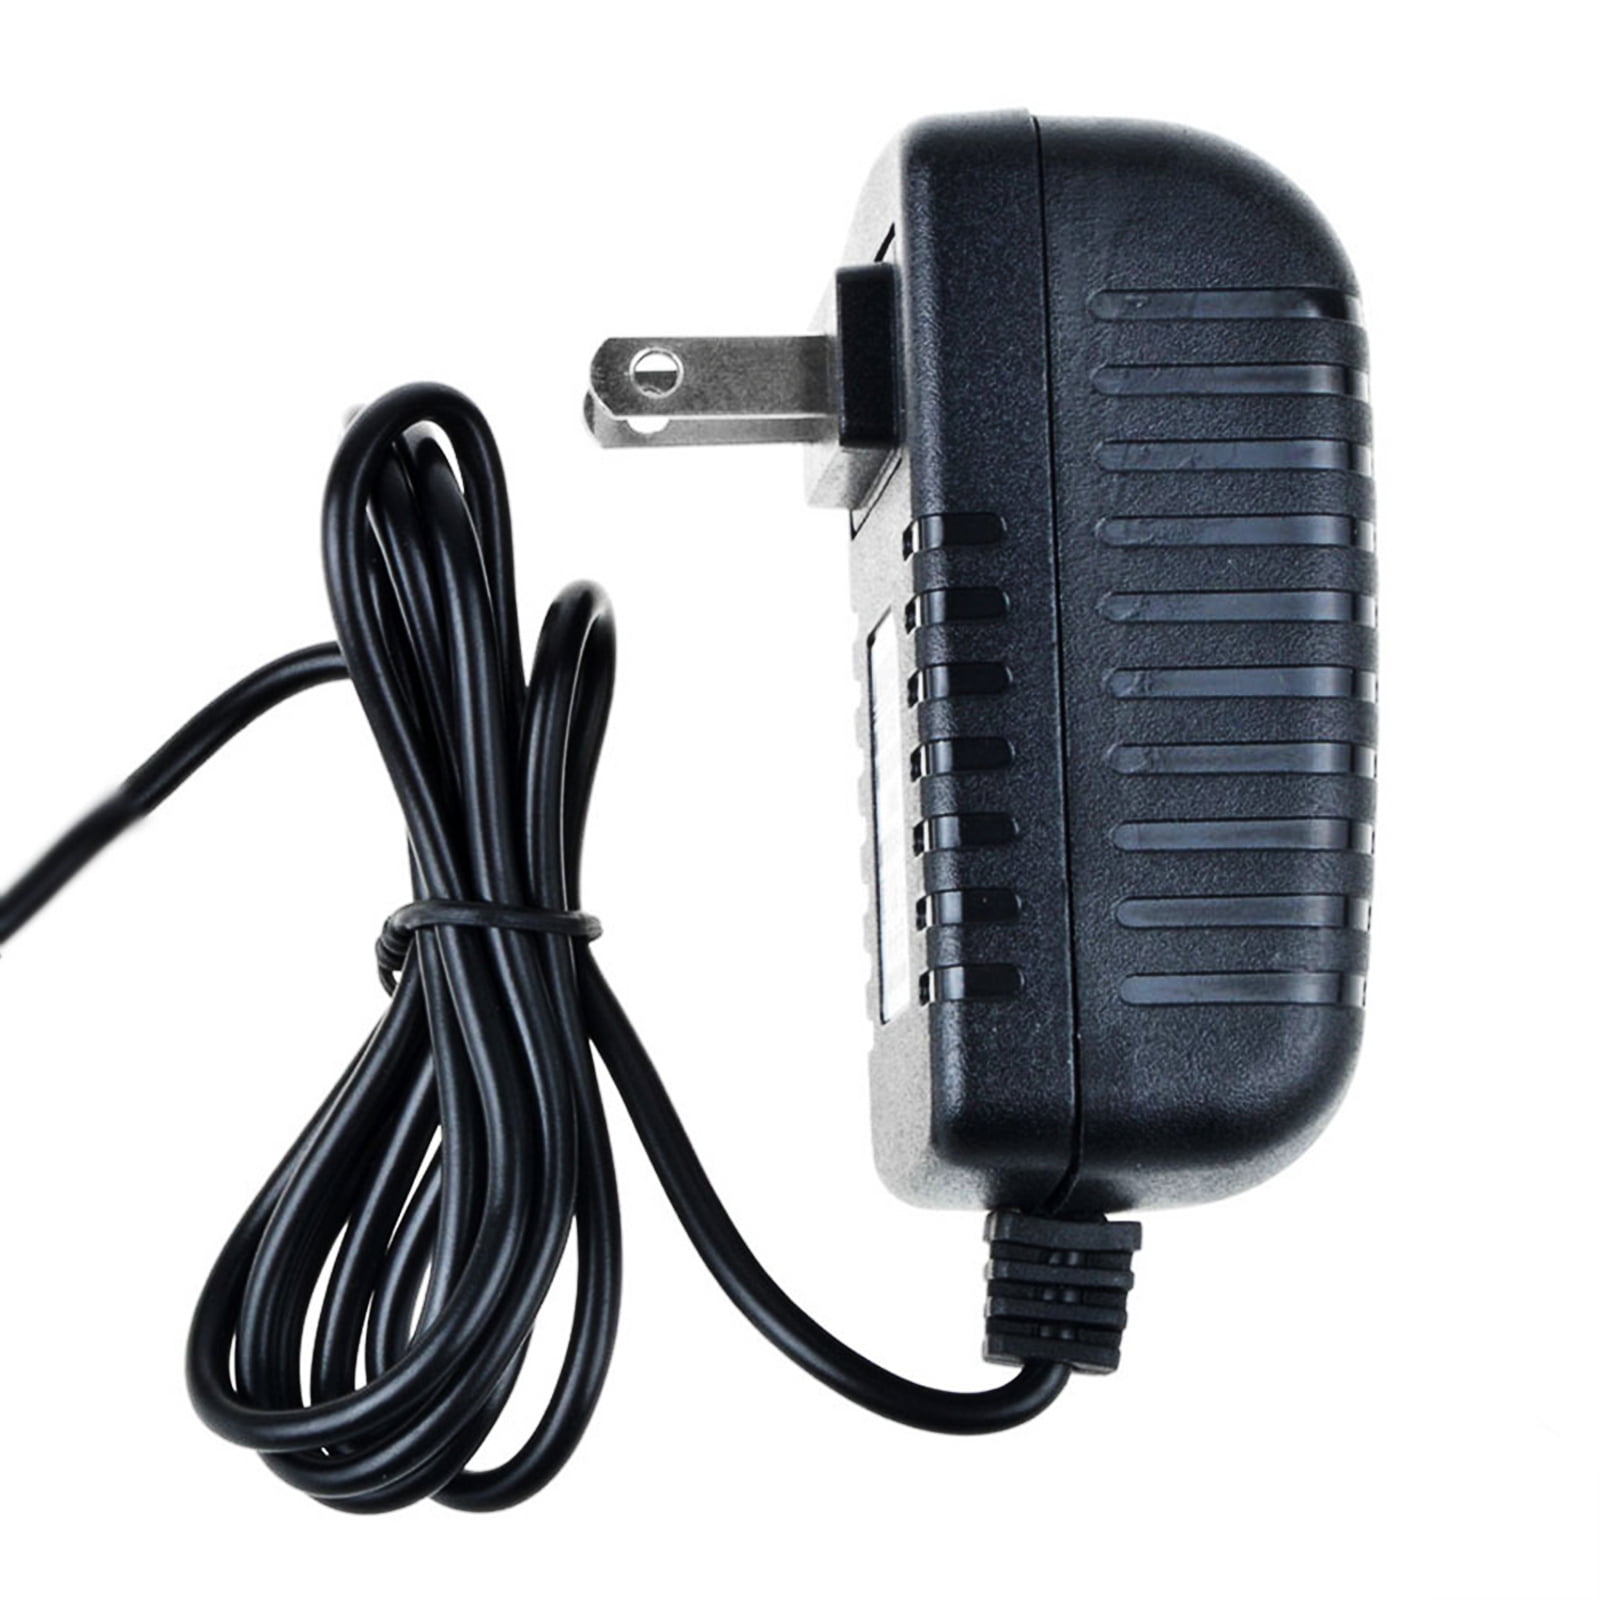 AC Adapter For VITAL Fitness MB350 RB260 Exercise Bike Power Supply Cord Charger 